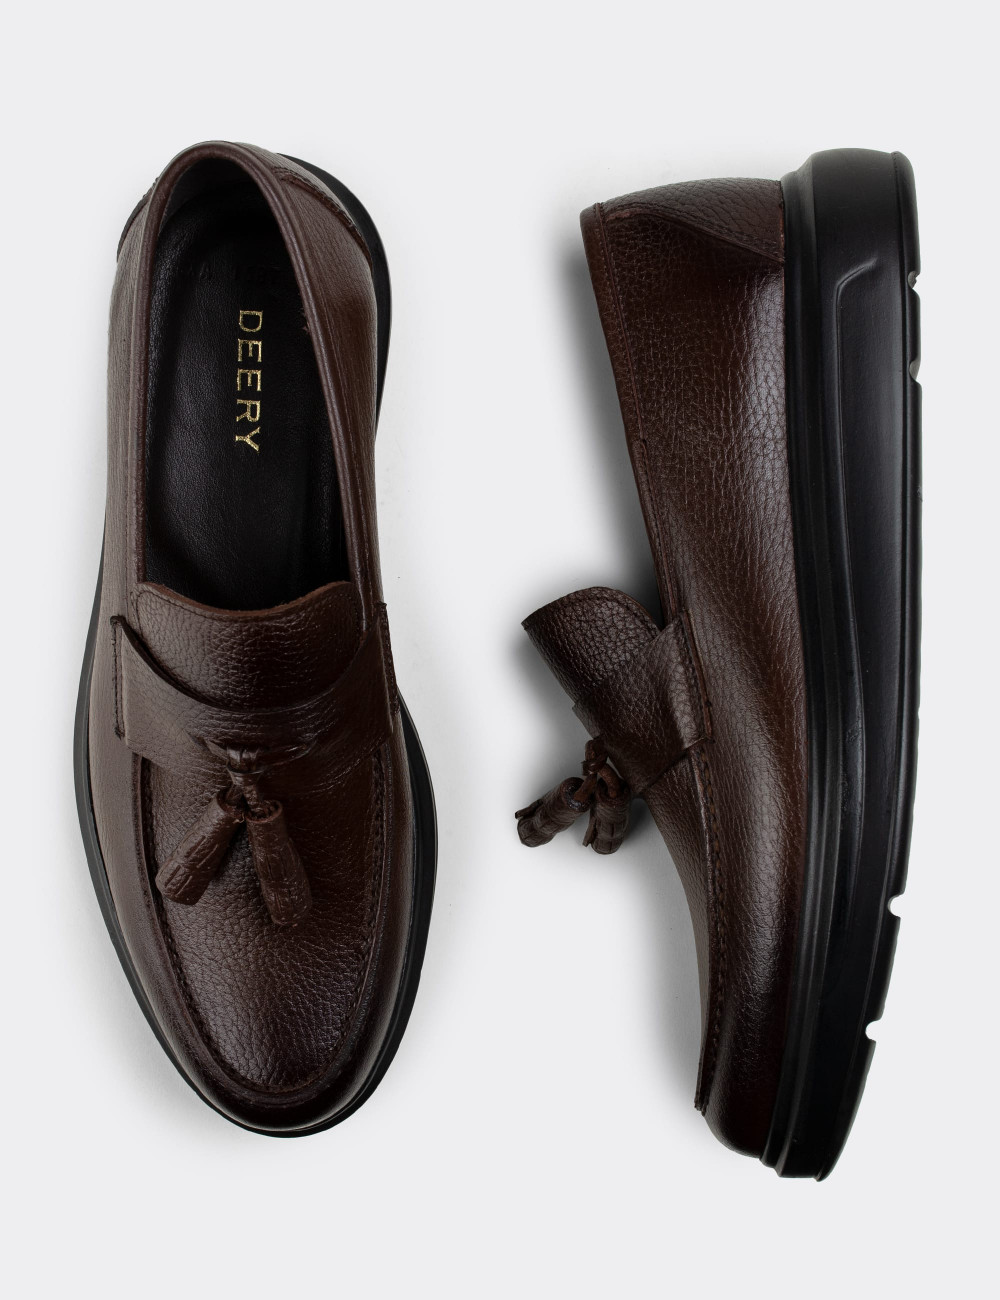 Deery Patent Leather Loafers